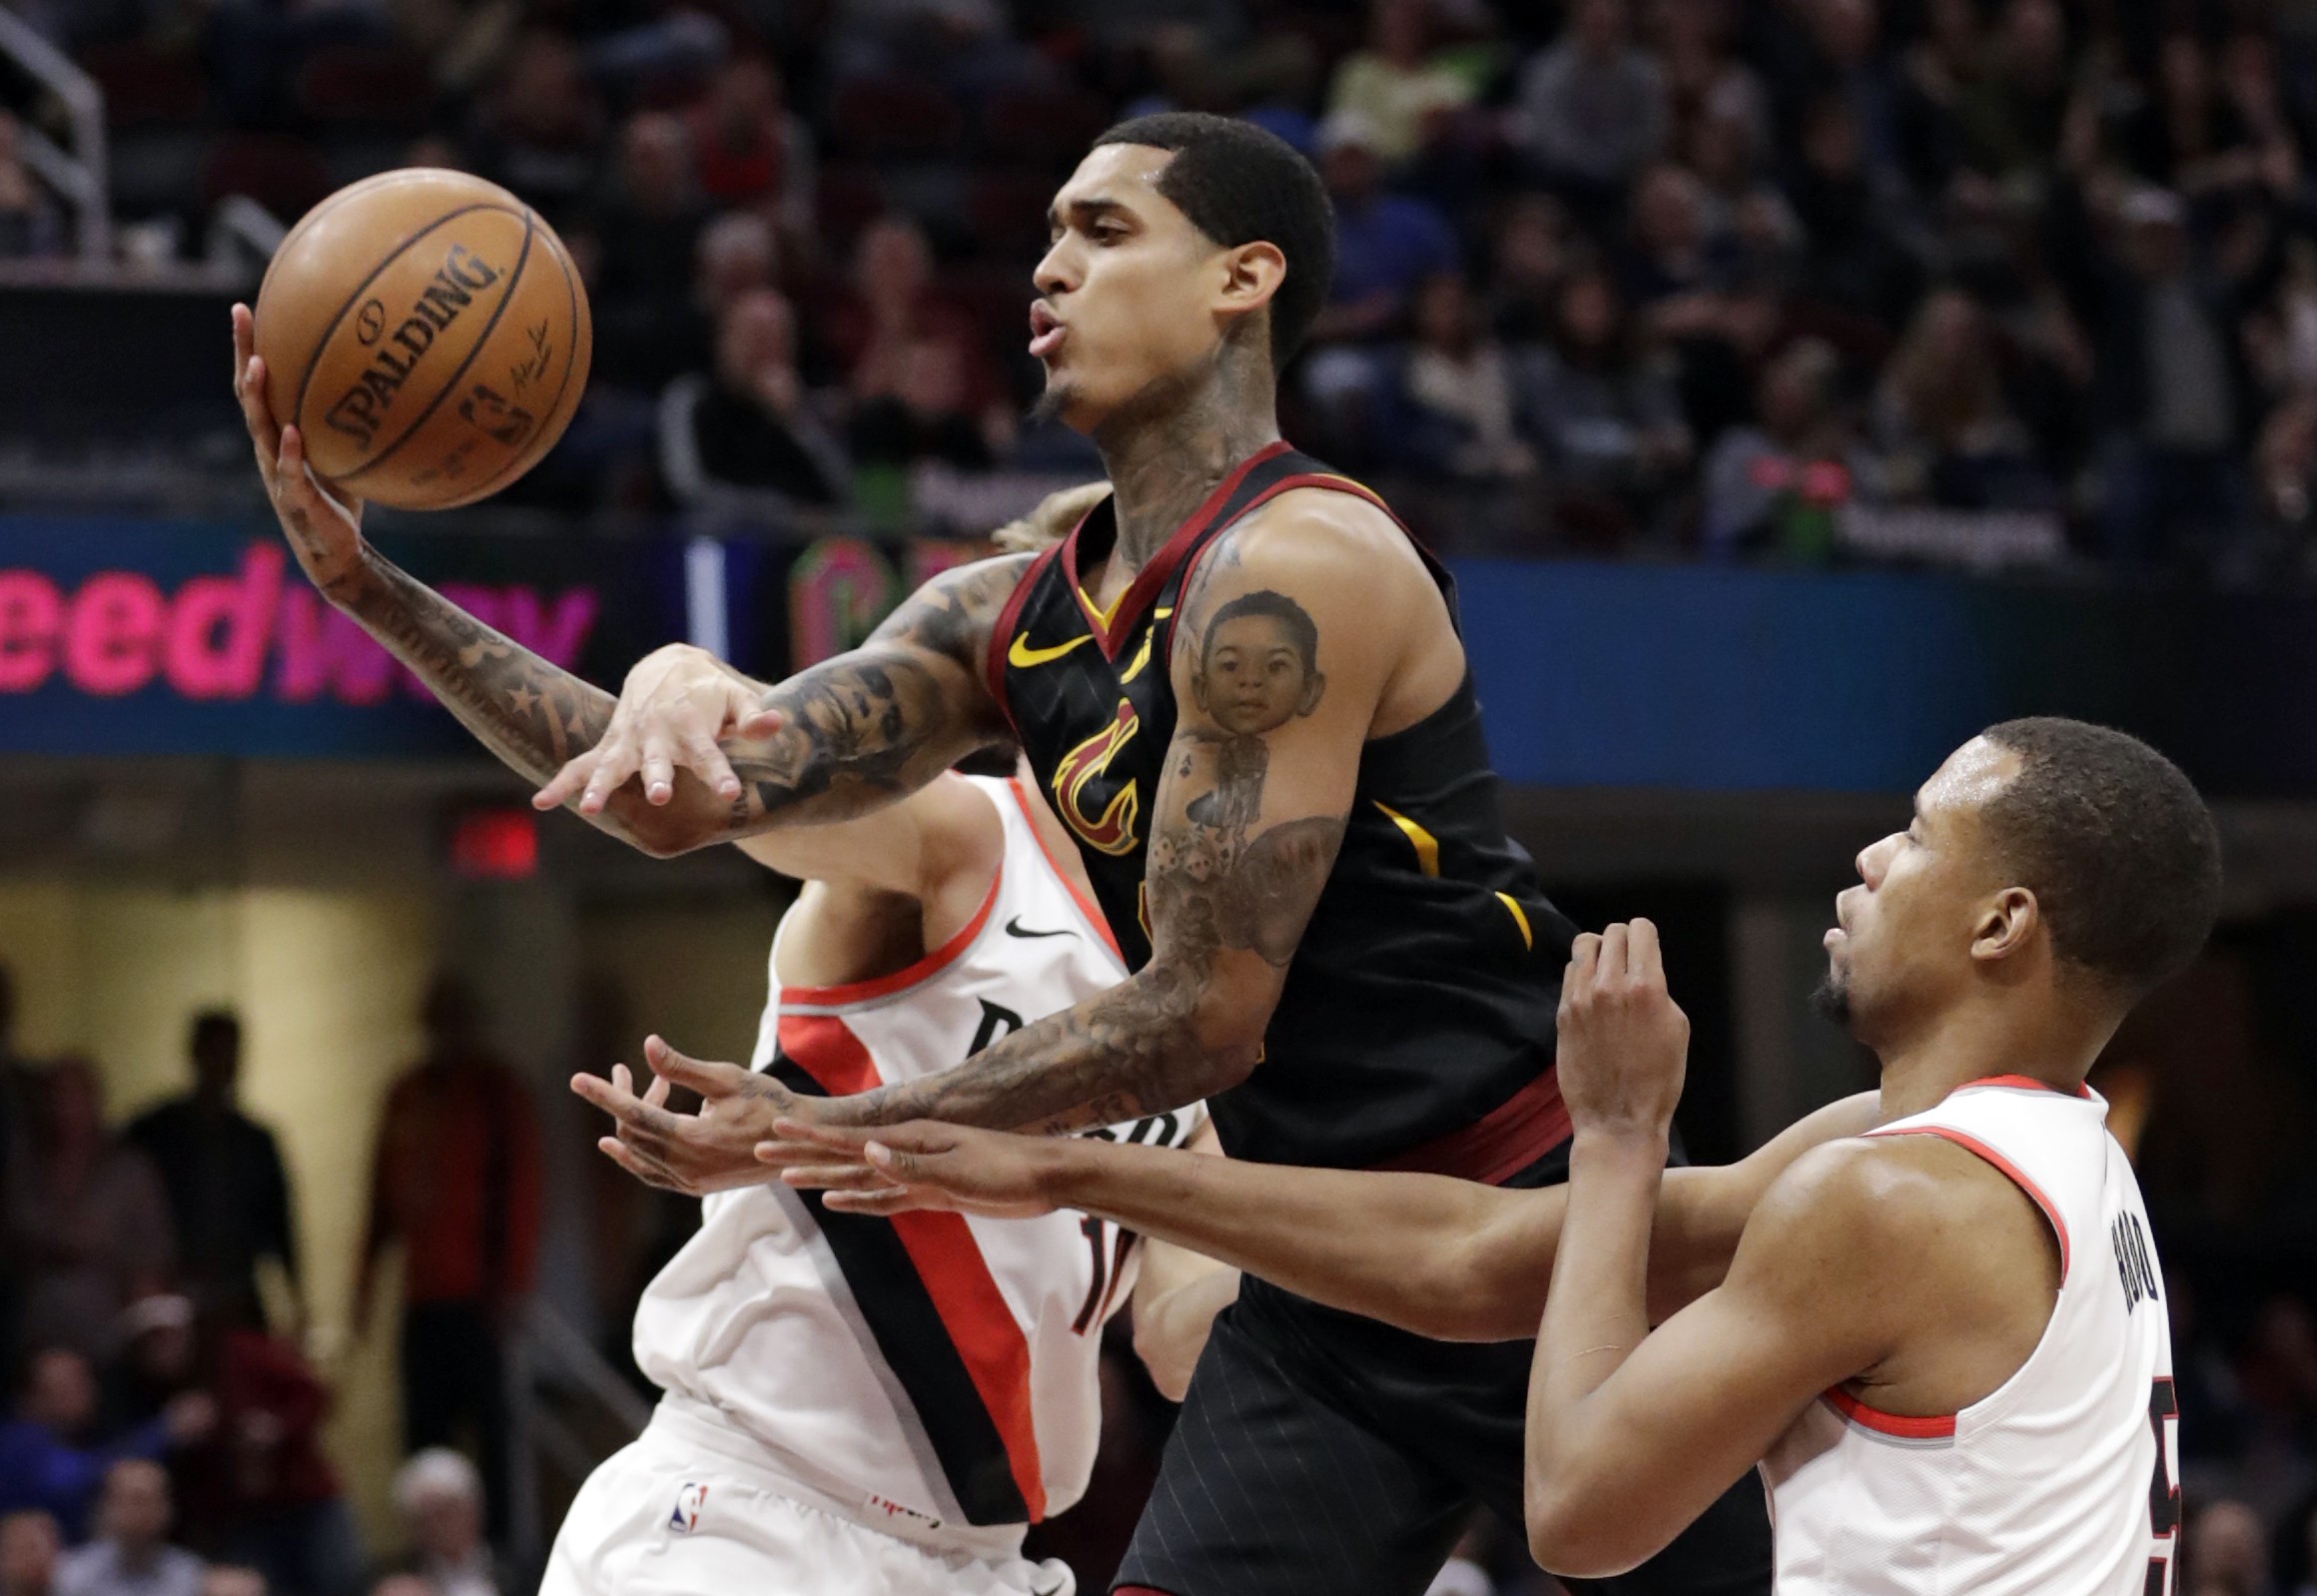 Cleveland Cavaliers' Jordan Clarkson is on the attack against Portland Trail Blazers in an NBA game in Ohio. Photo: AP